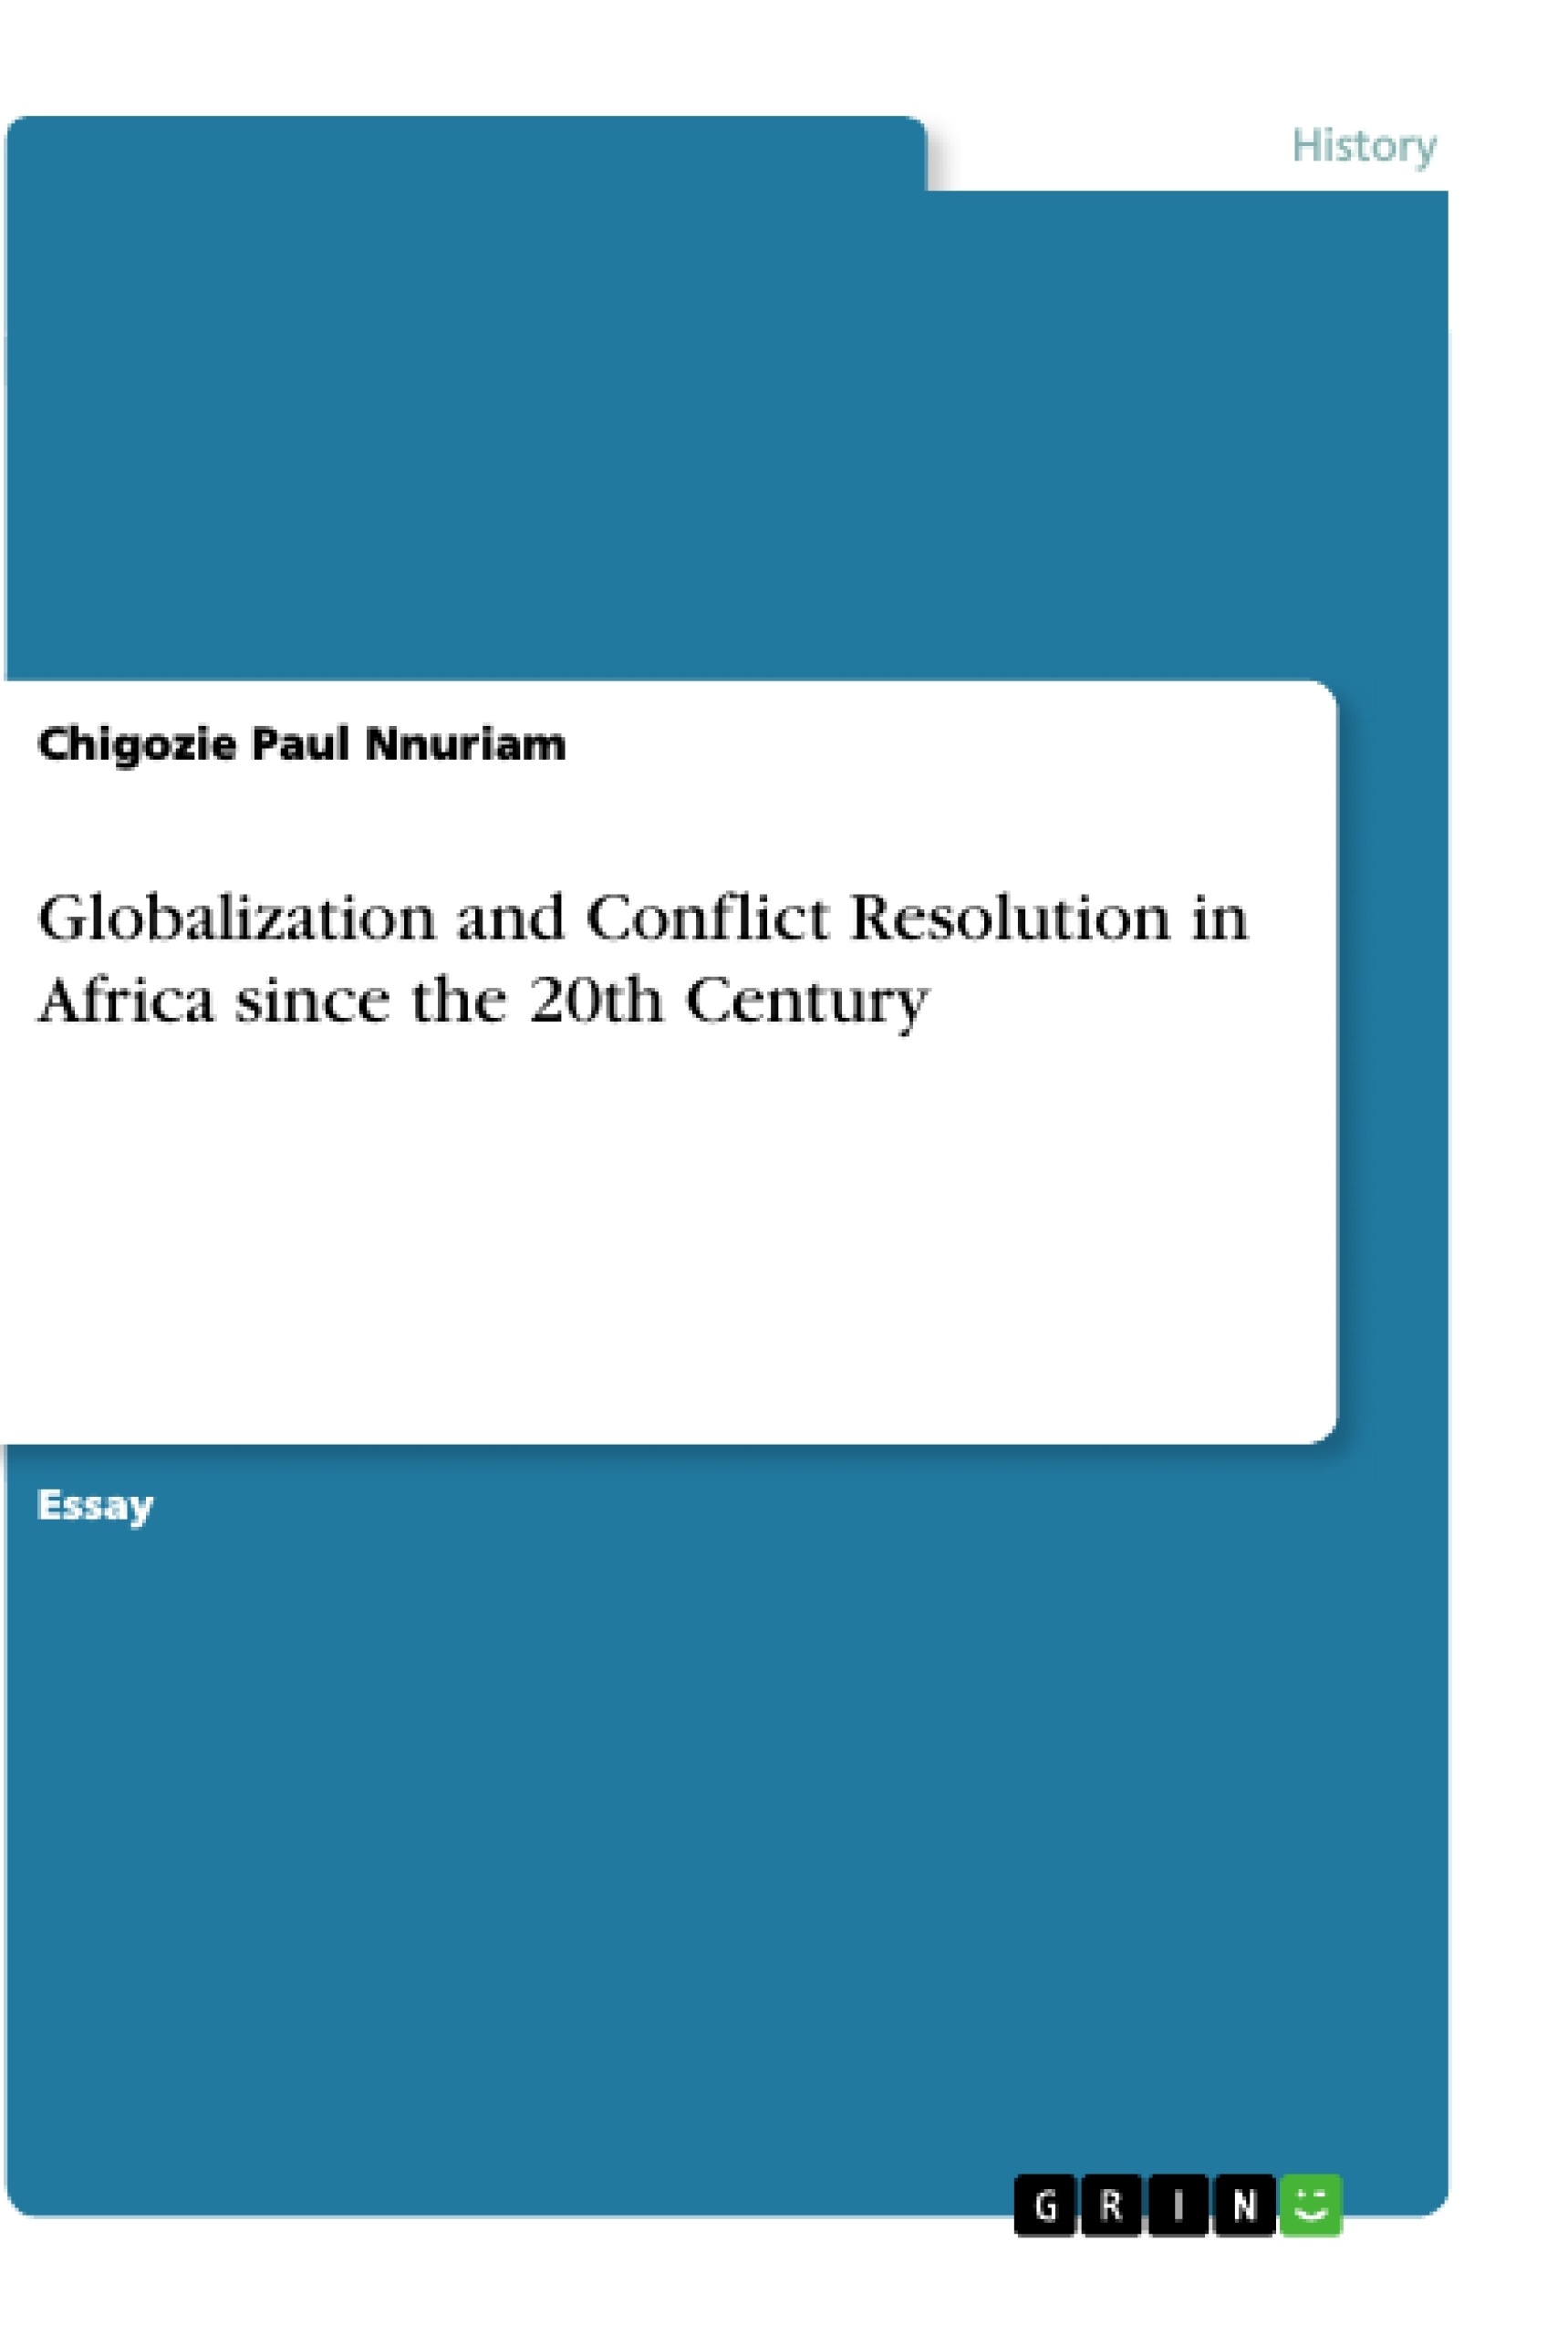 Title: Globalization and Conflict Resolution in Africa since the 20th Century